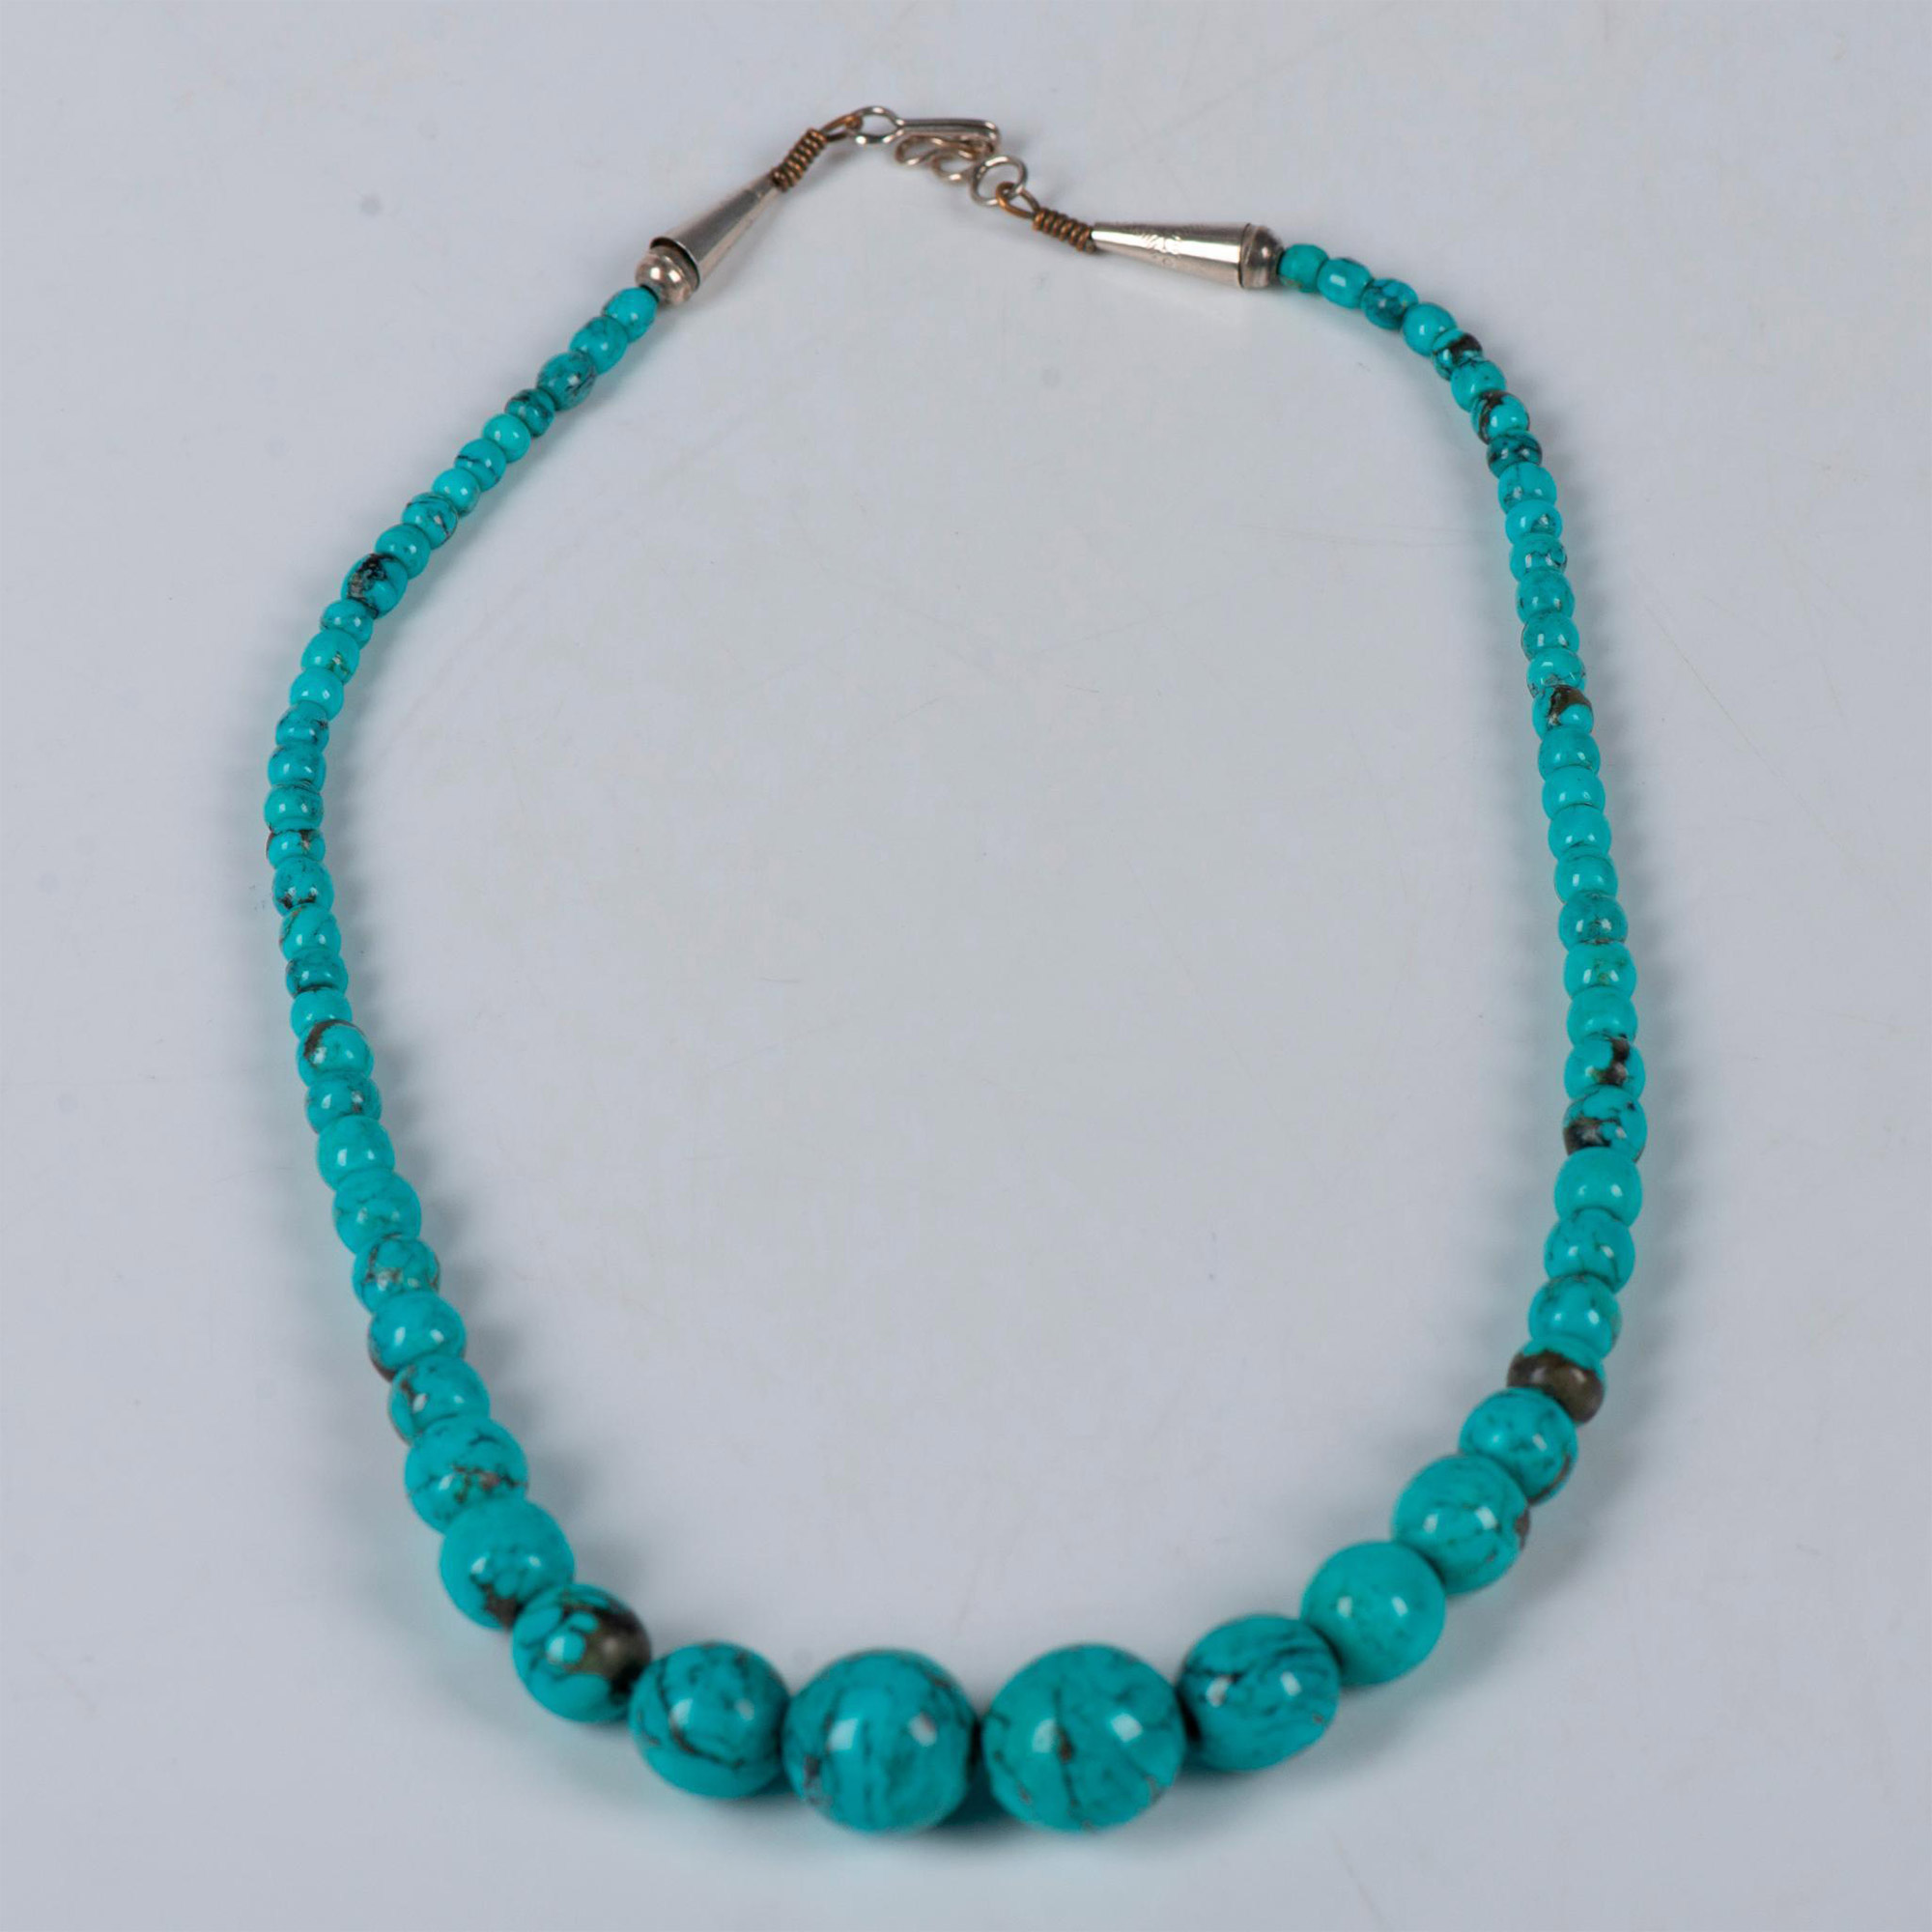 Turquoise Bead and Sterling Silver Necklace - Image 4 of 4